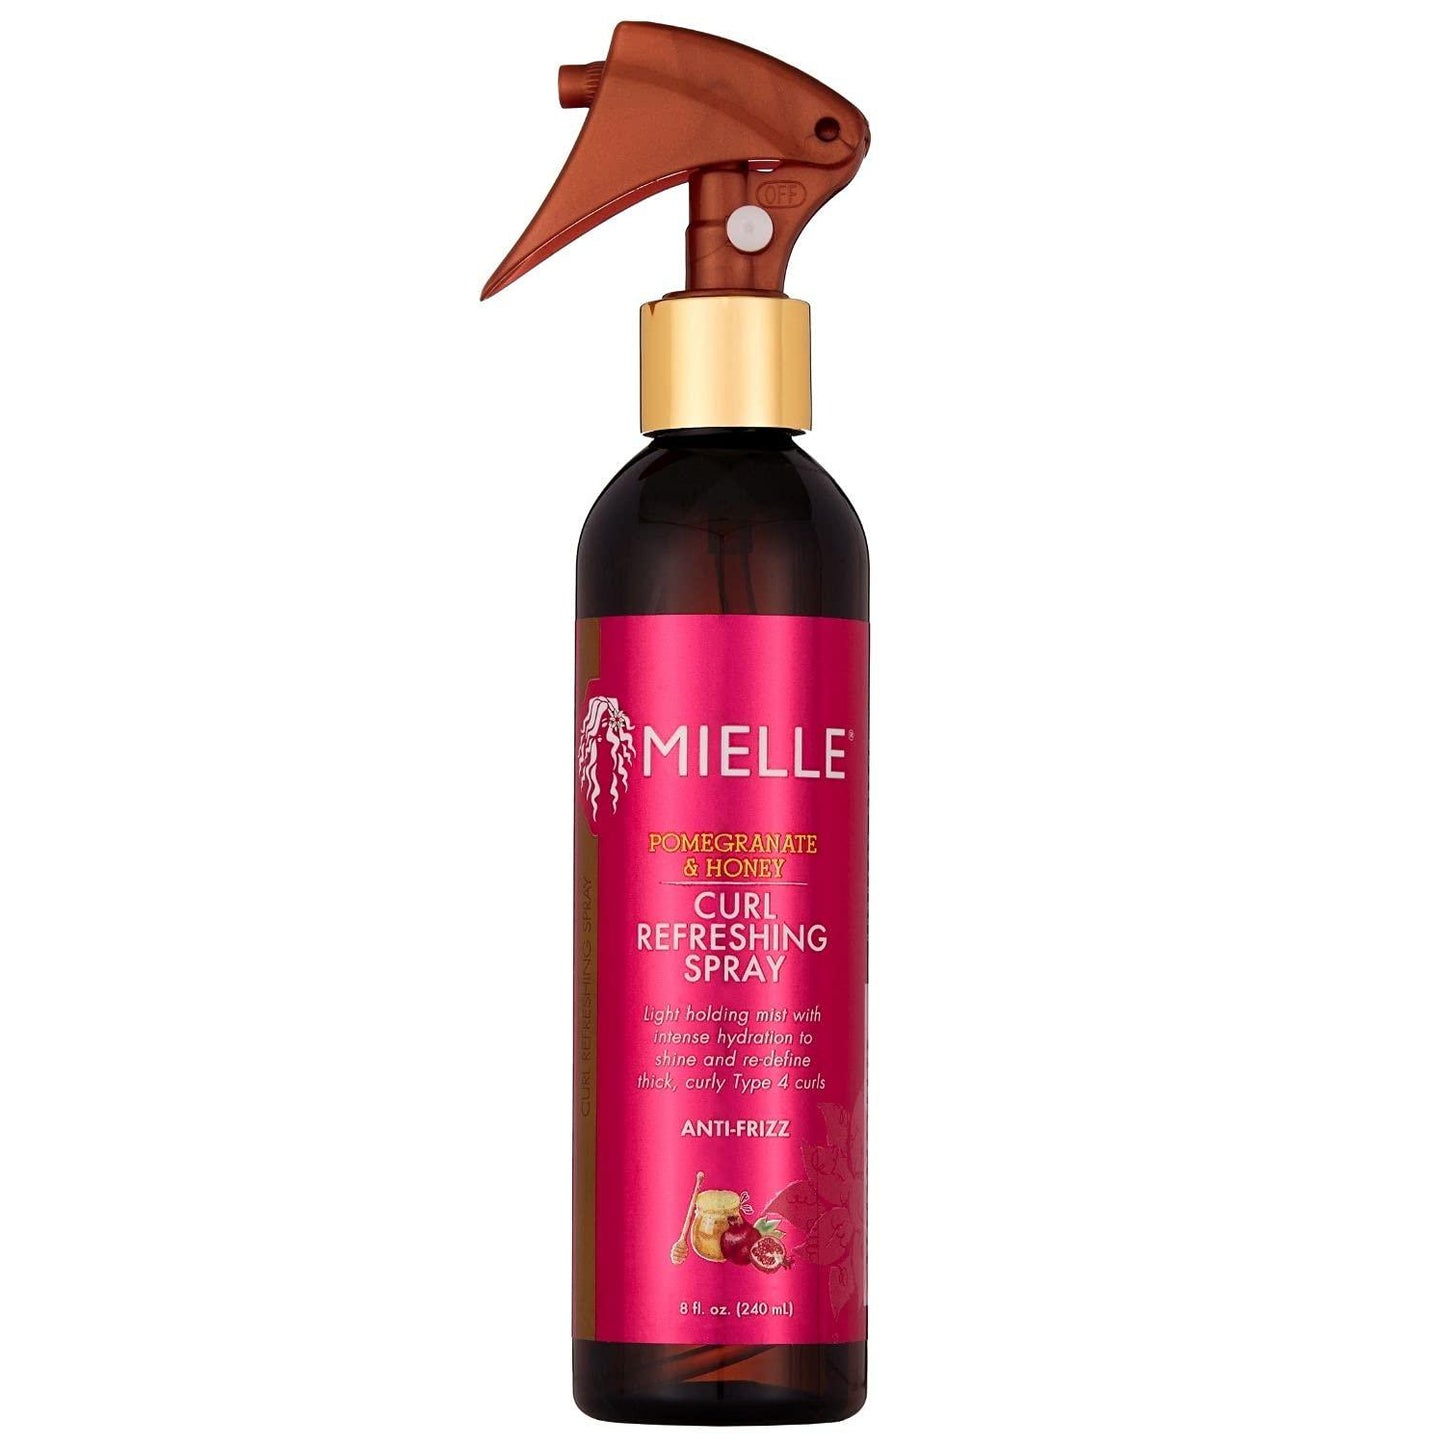 Mielle Pomegranate and Honey Curl Refreshing Spray